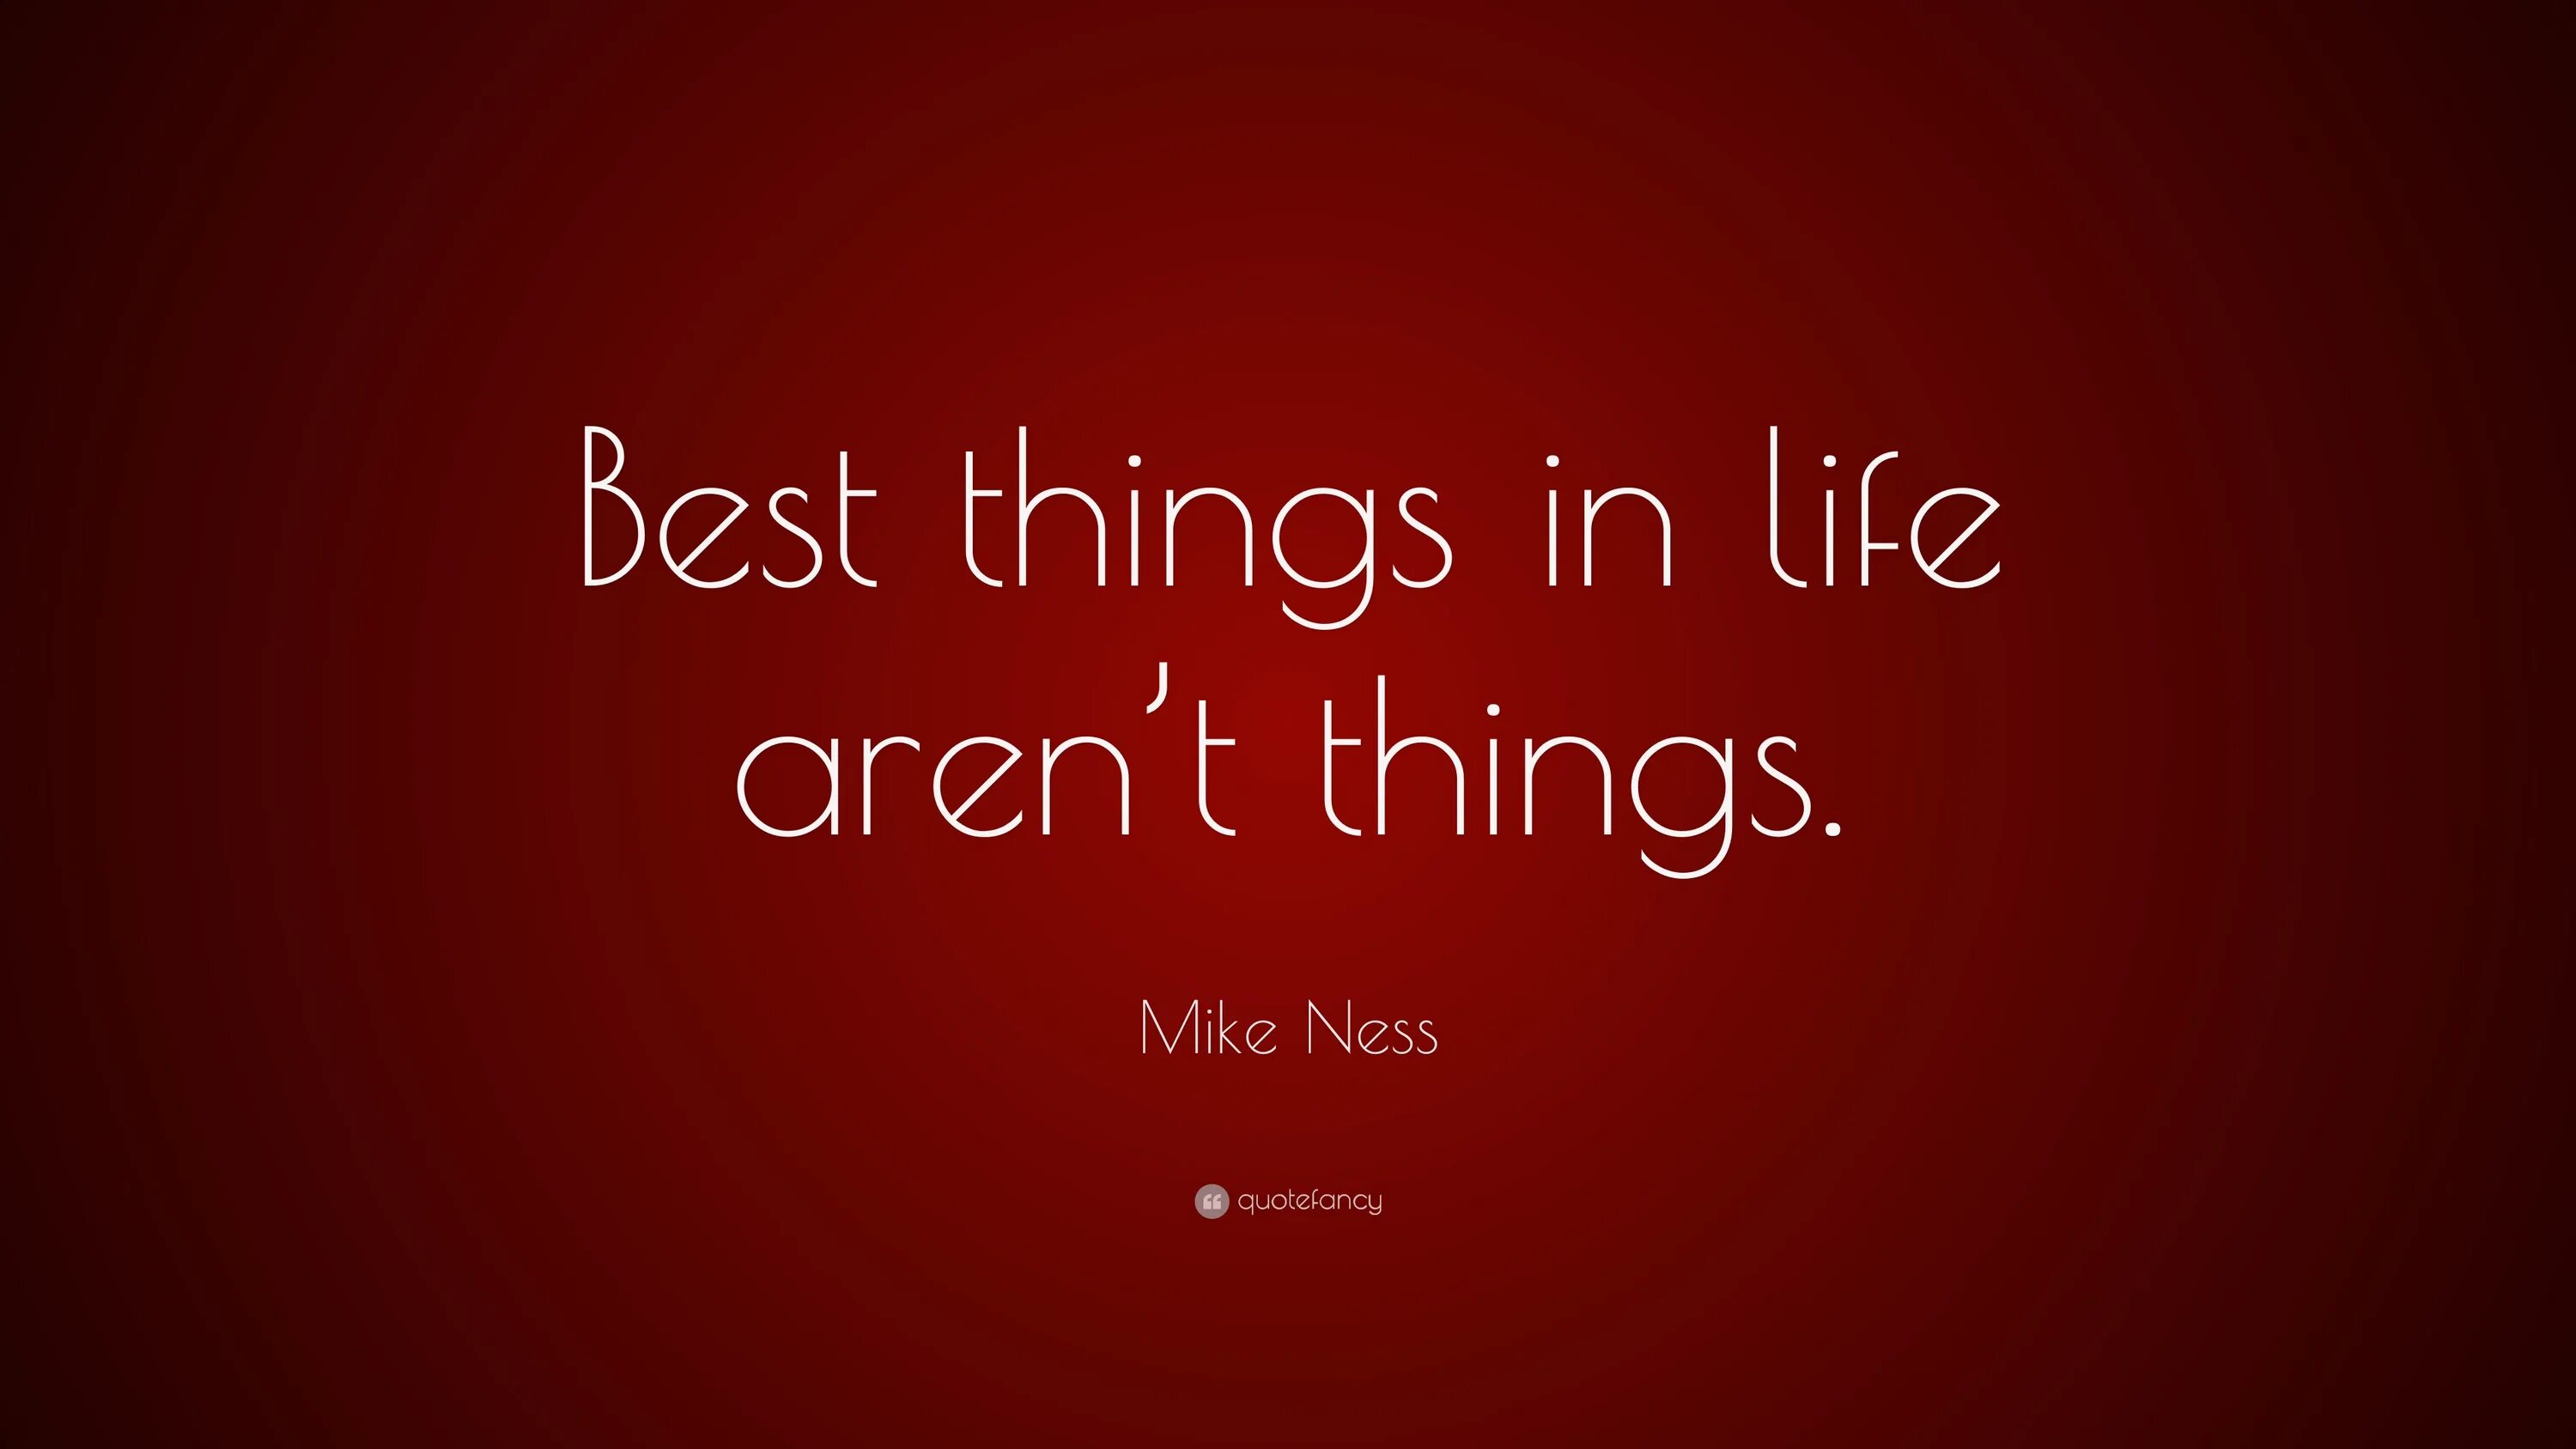 The best things in Life. Good things in Life. The best things in Life aren't things. The best thing.